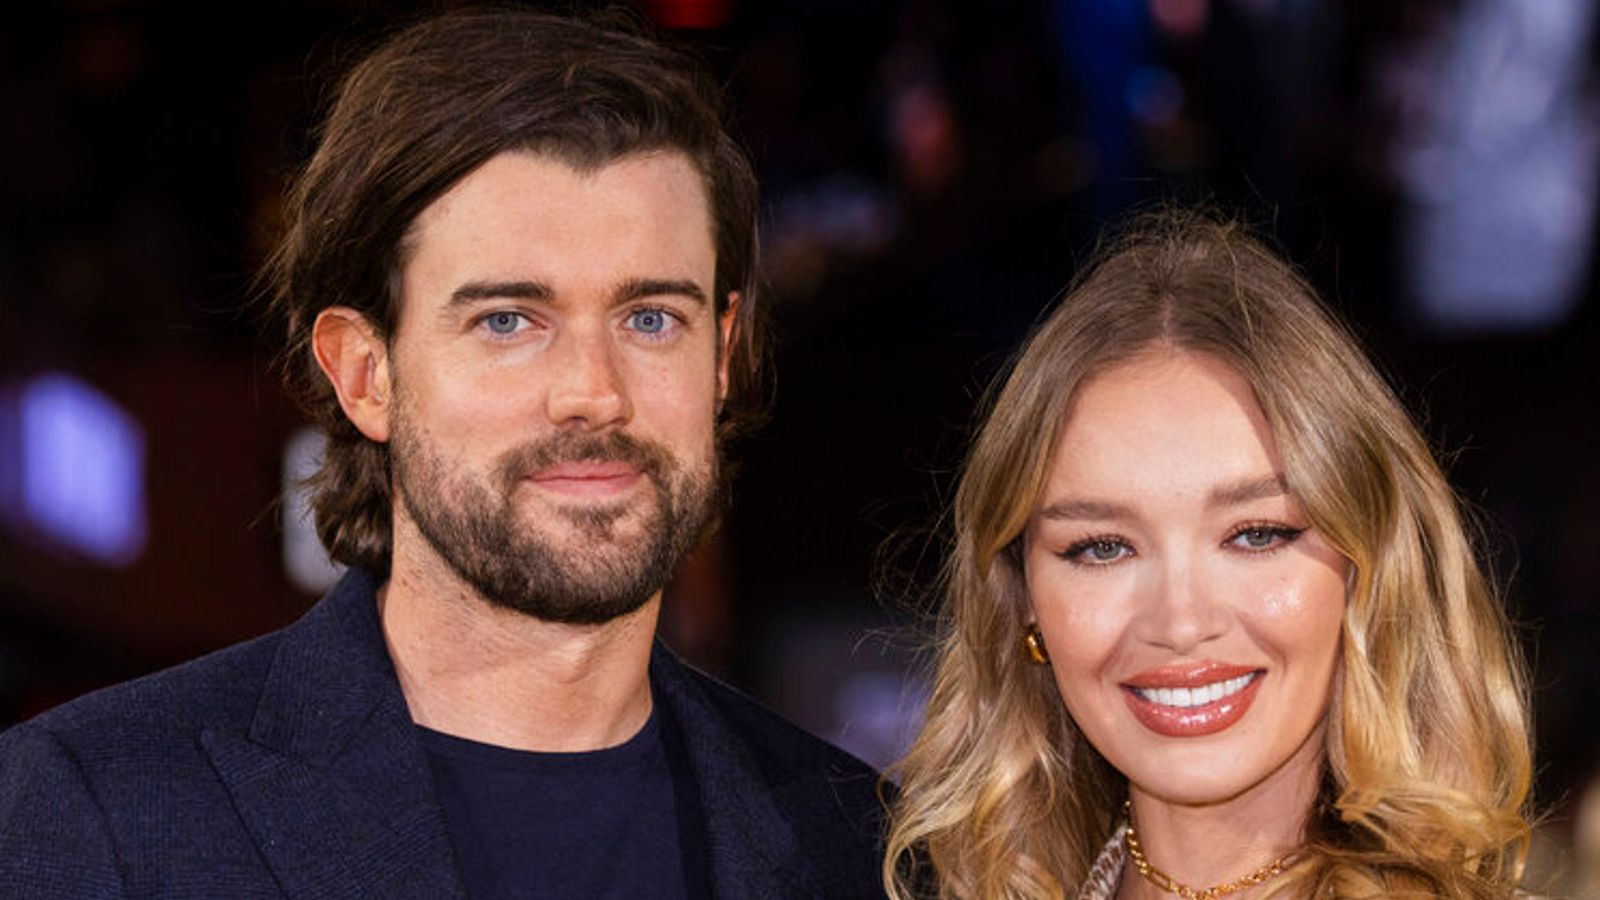 Jack Whitehall with his partner Roxy Horner at an event